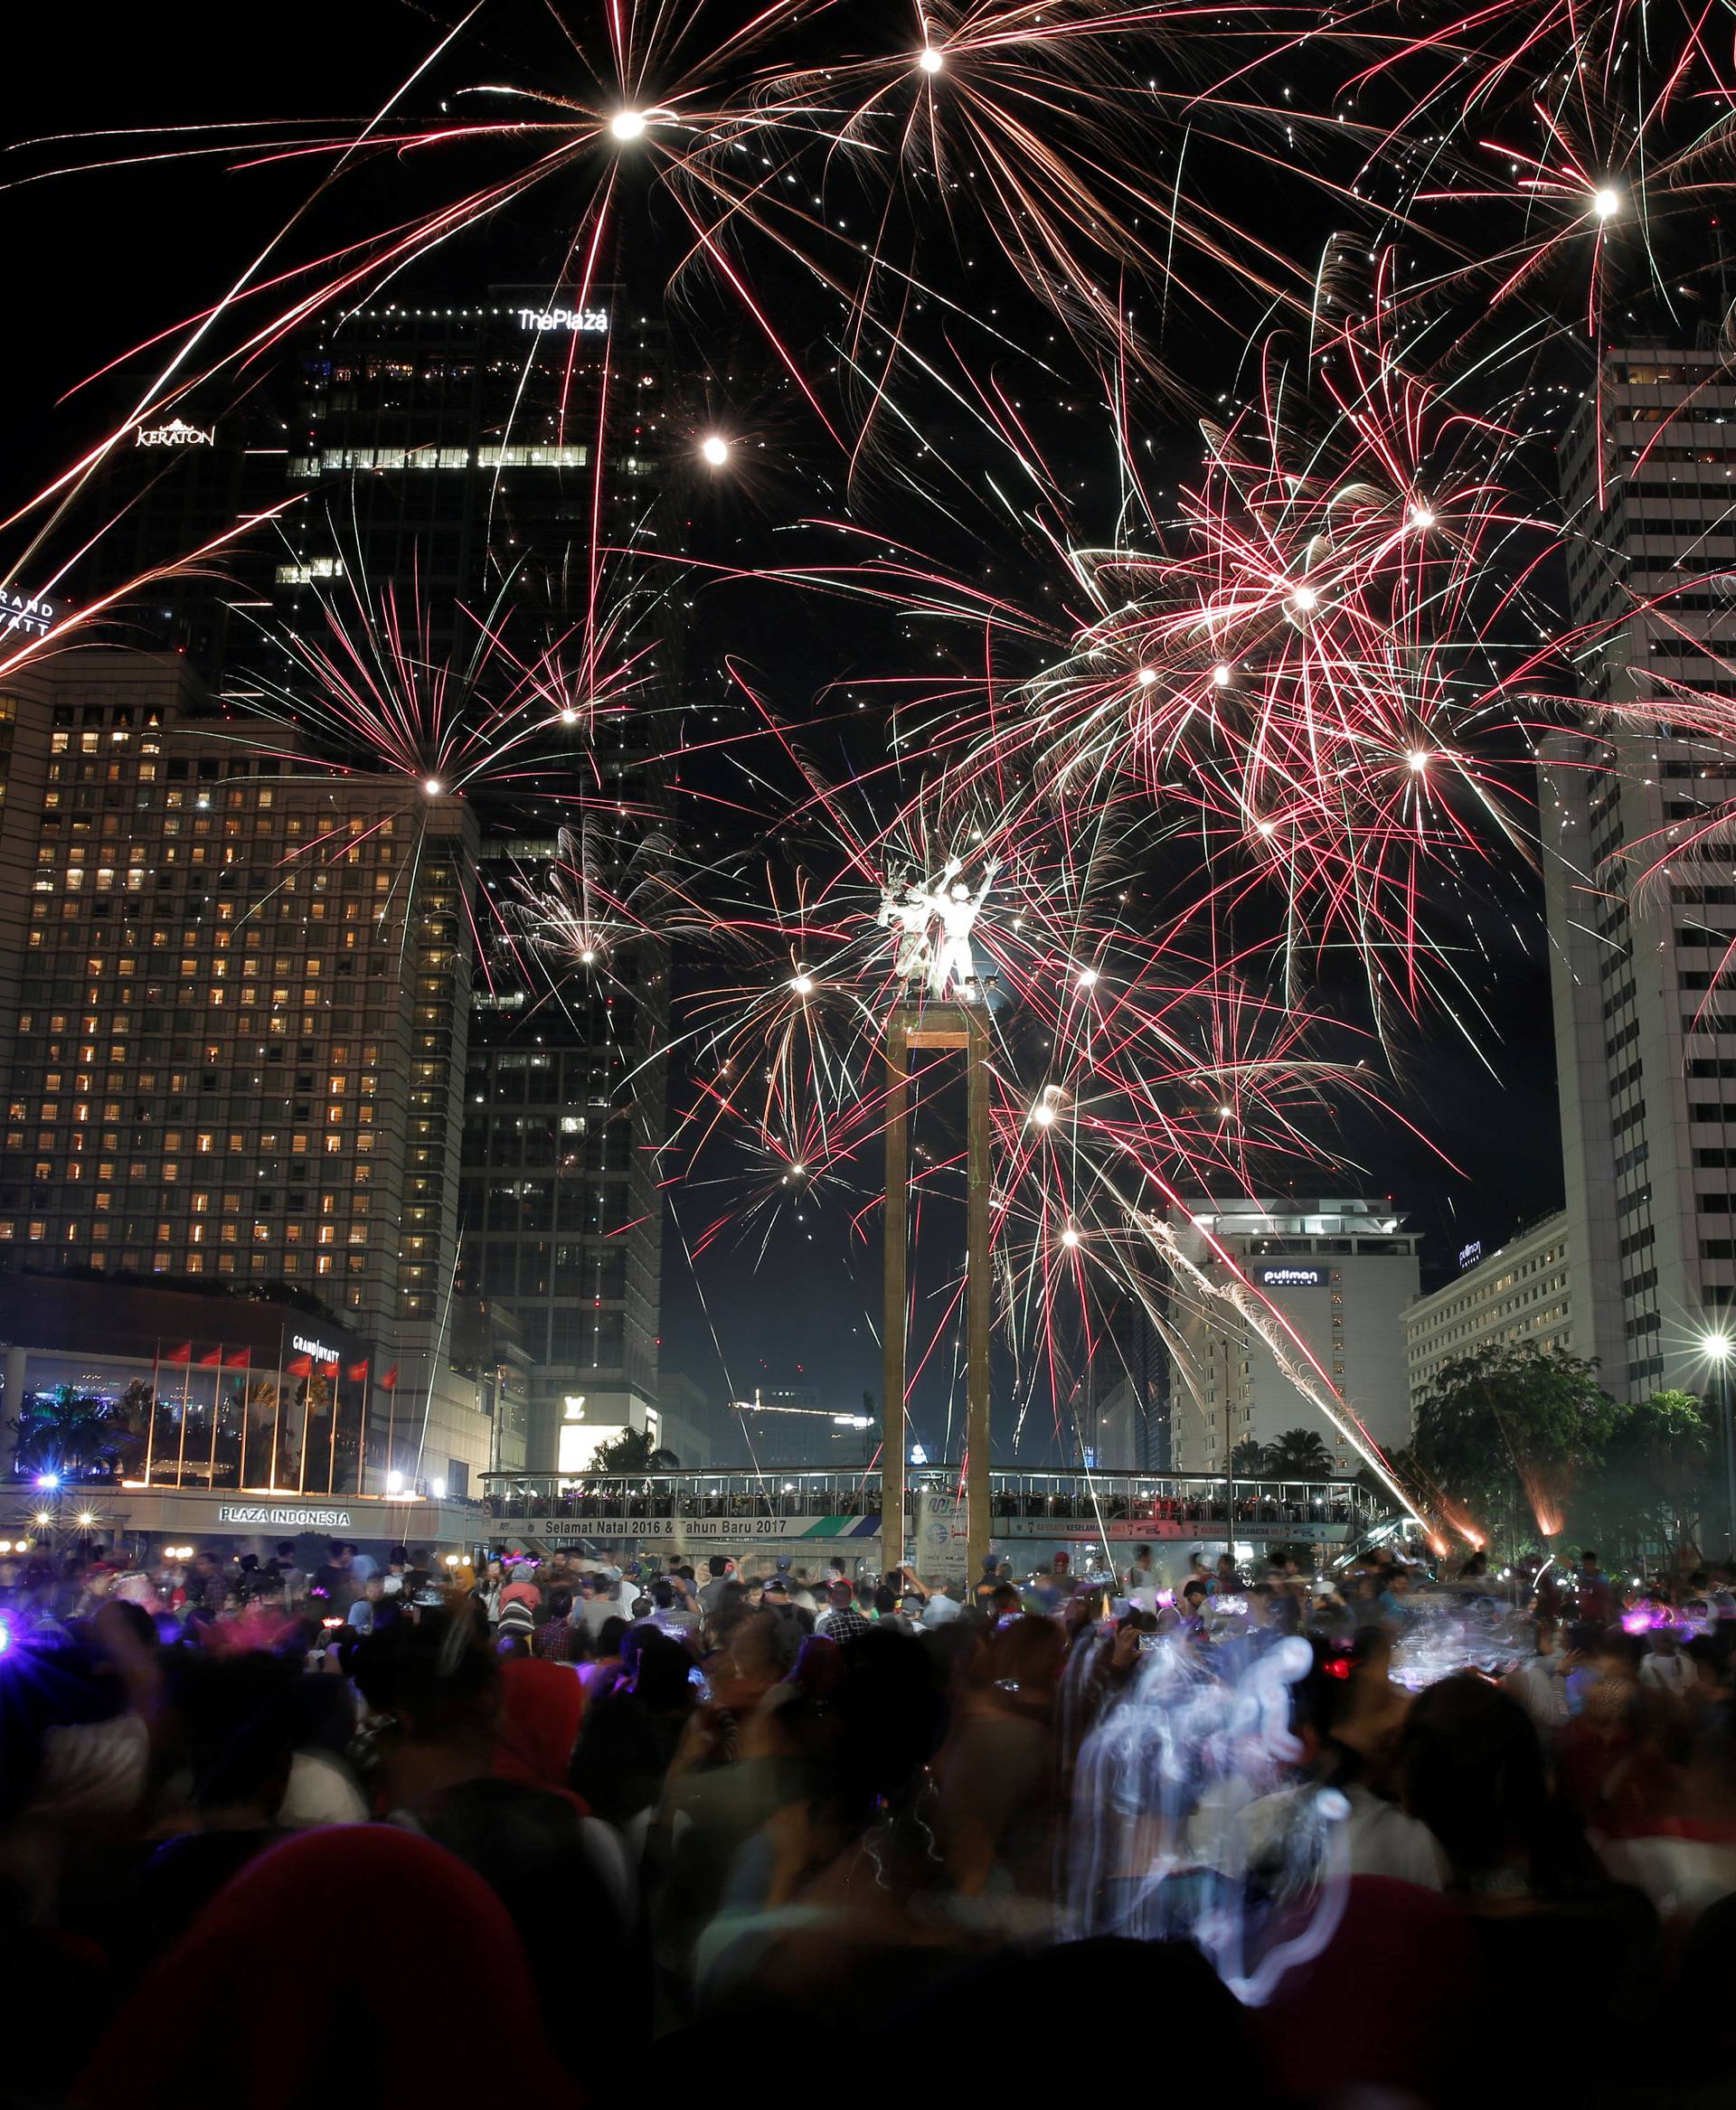 People watch fireworks explode around the Selamat Datang Monument during New Year's Eve celebrations in Jakarta